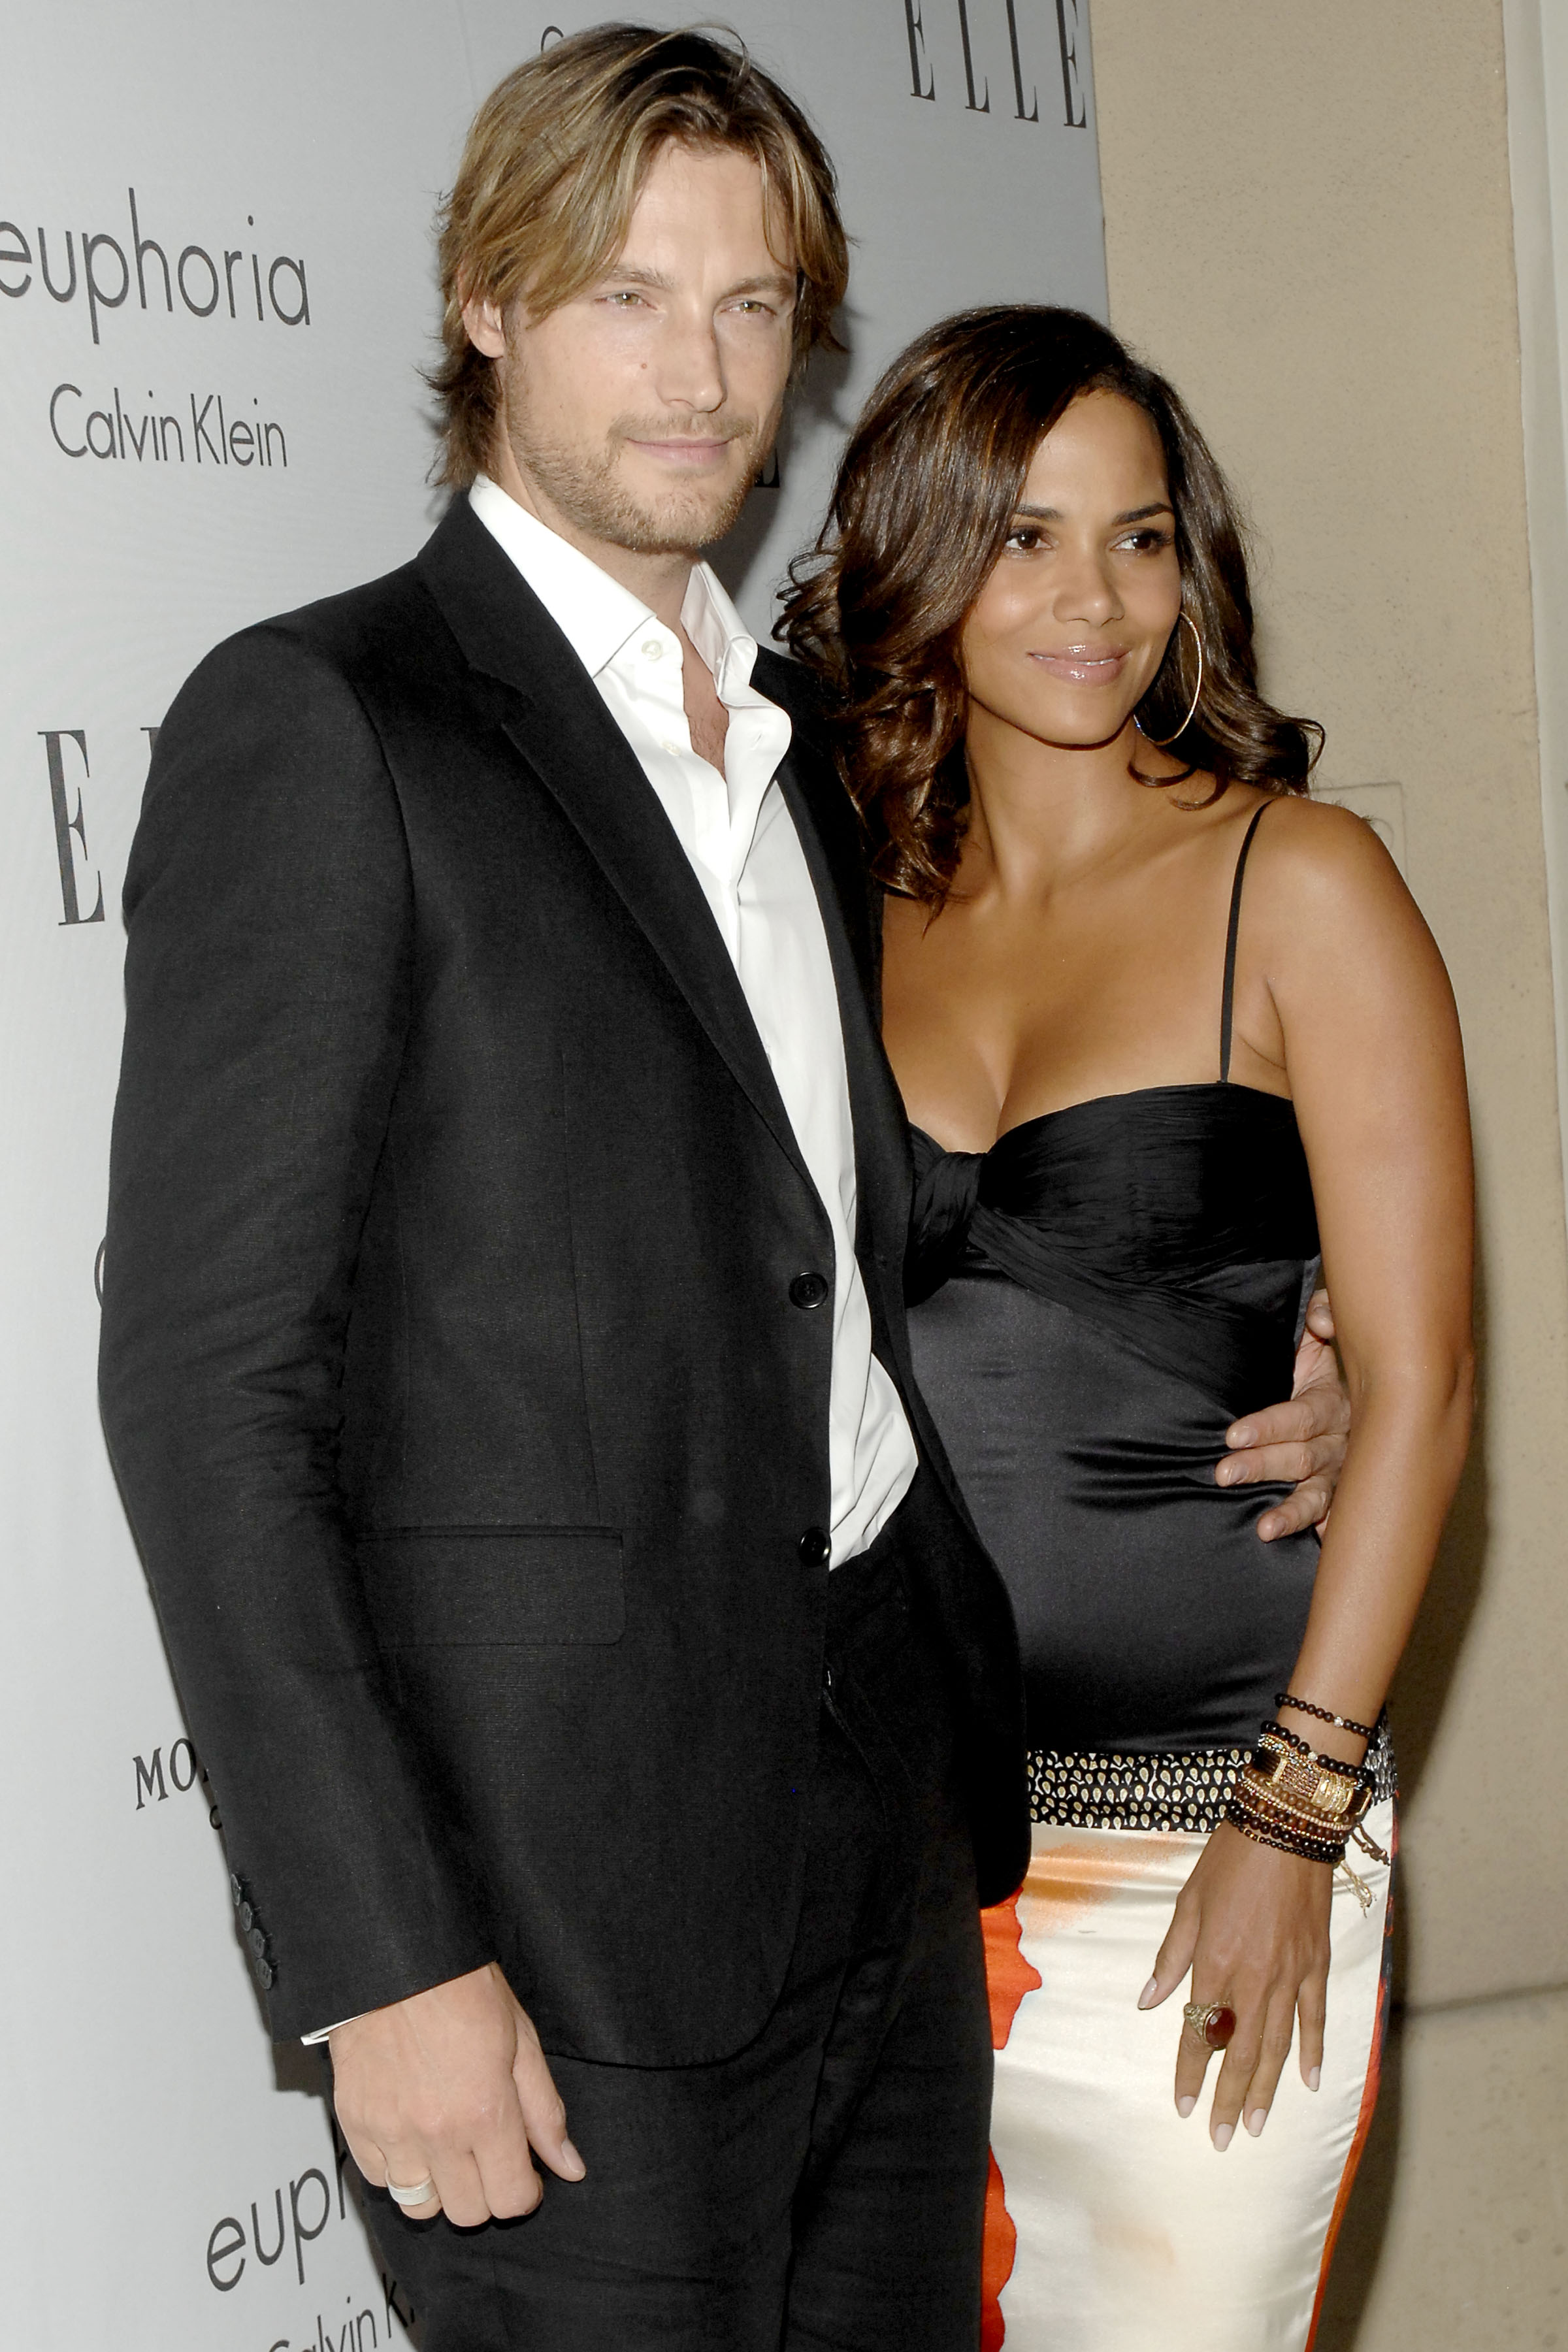 Gabriel Aubry and Halle Berry in California in 2008 | Source: Getty Images